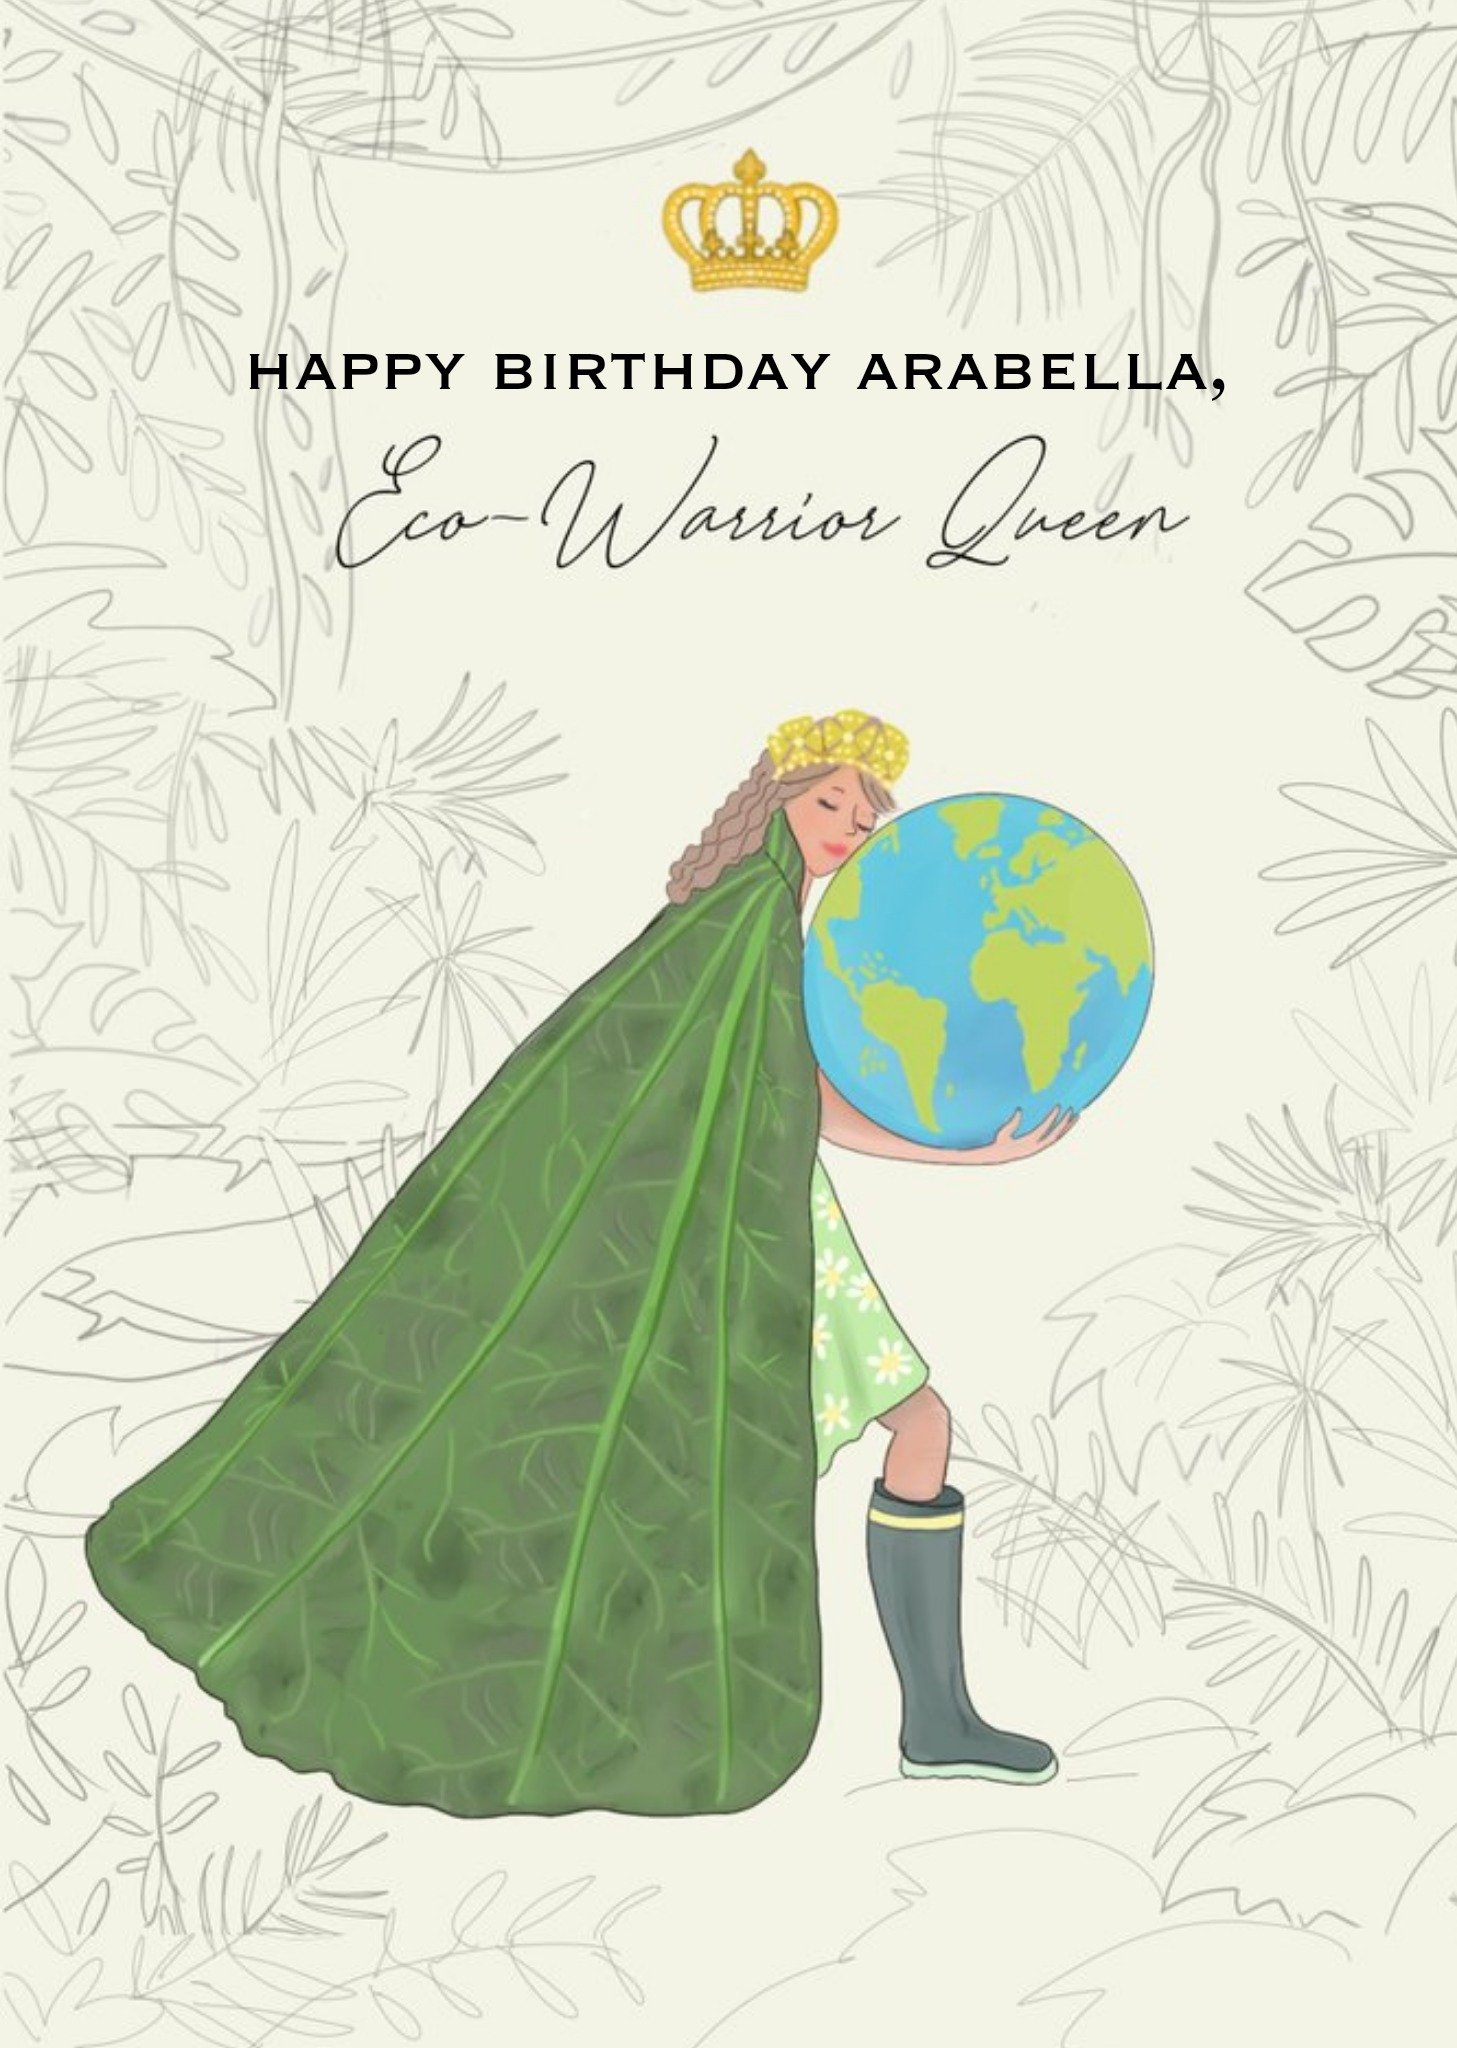 Moonpig Illustration Of An Eco Warrior Queen Happy Birthday Card, Large